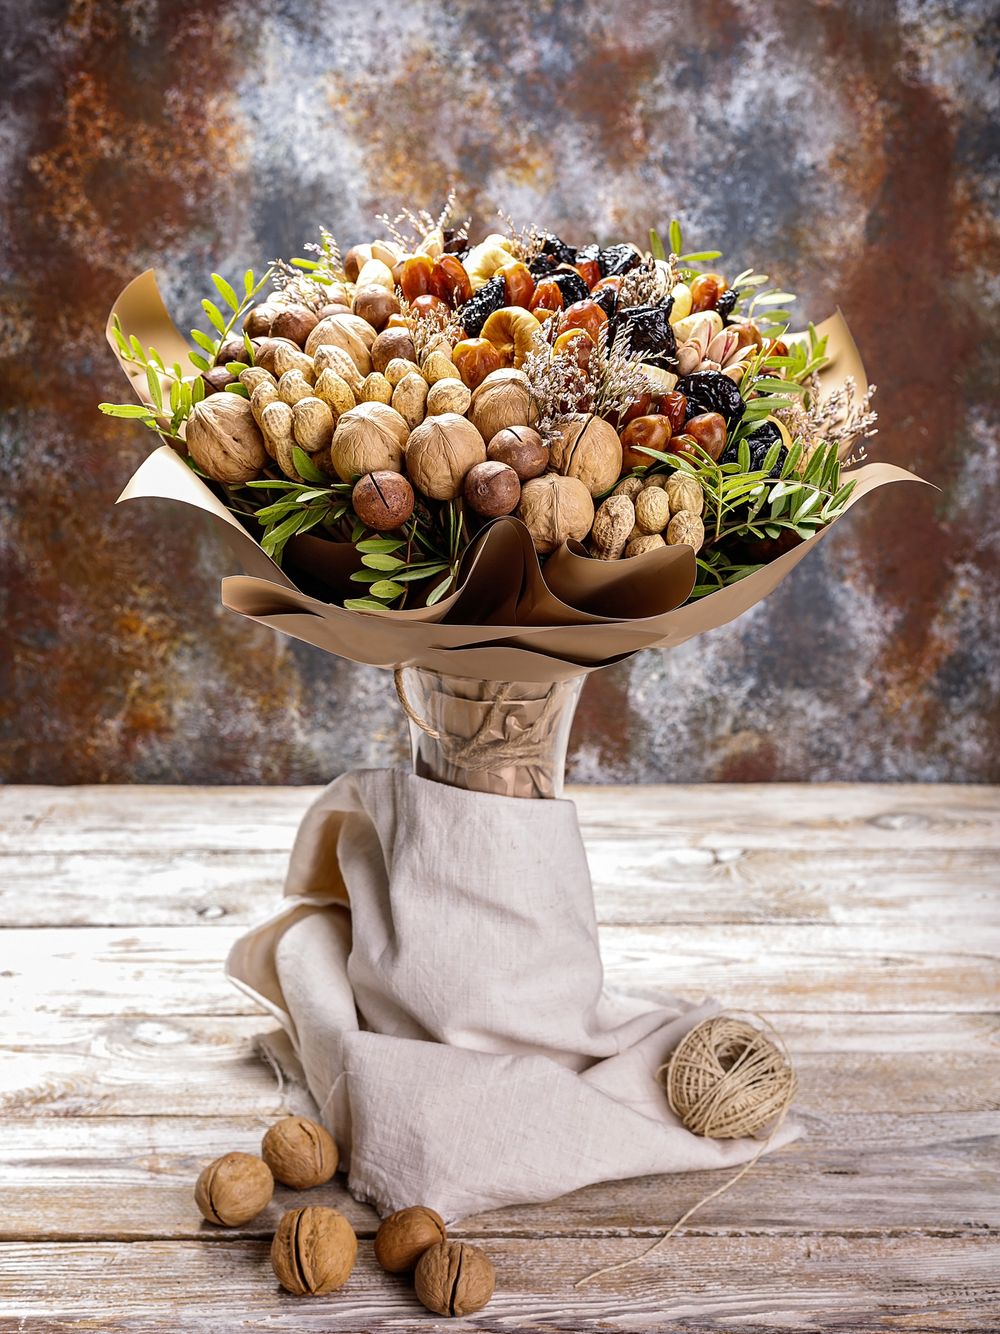 Gourmet nuts valentine’s candy bouquet 